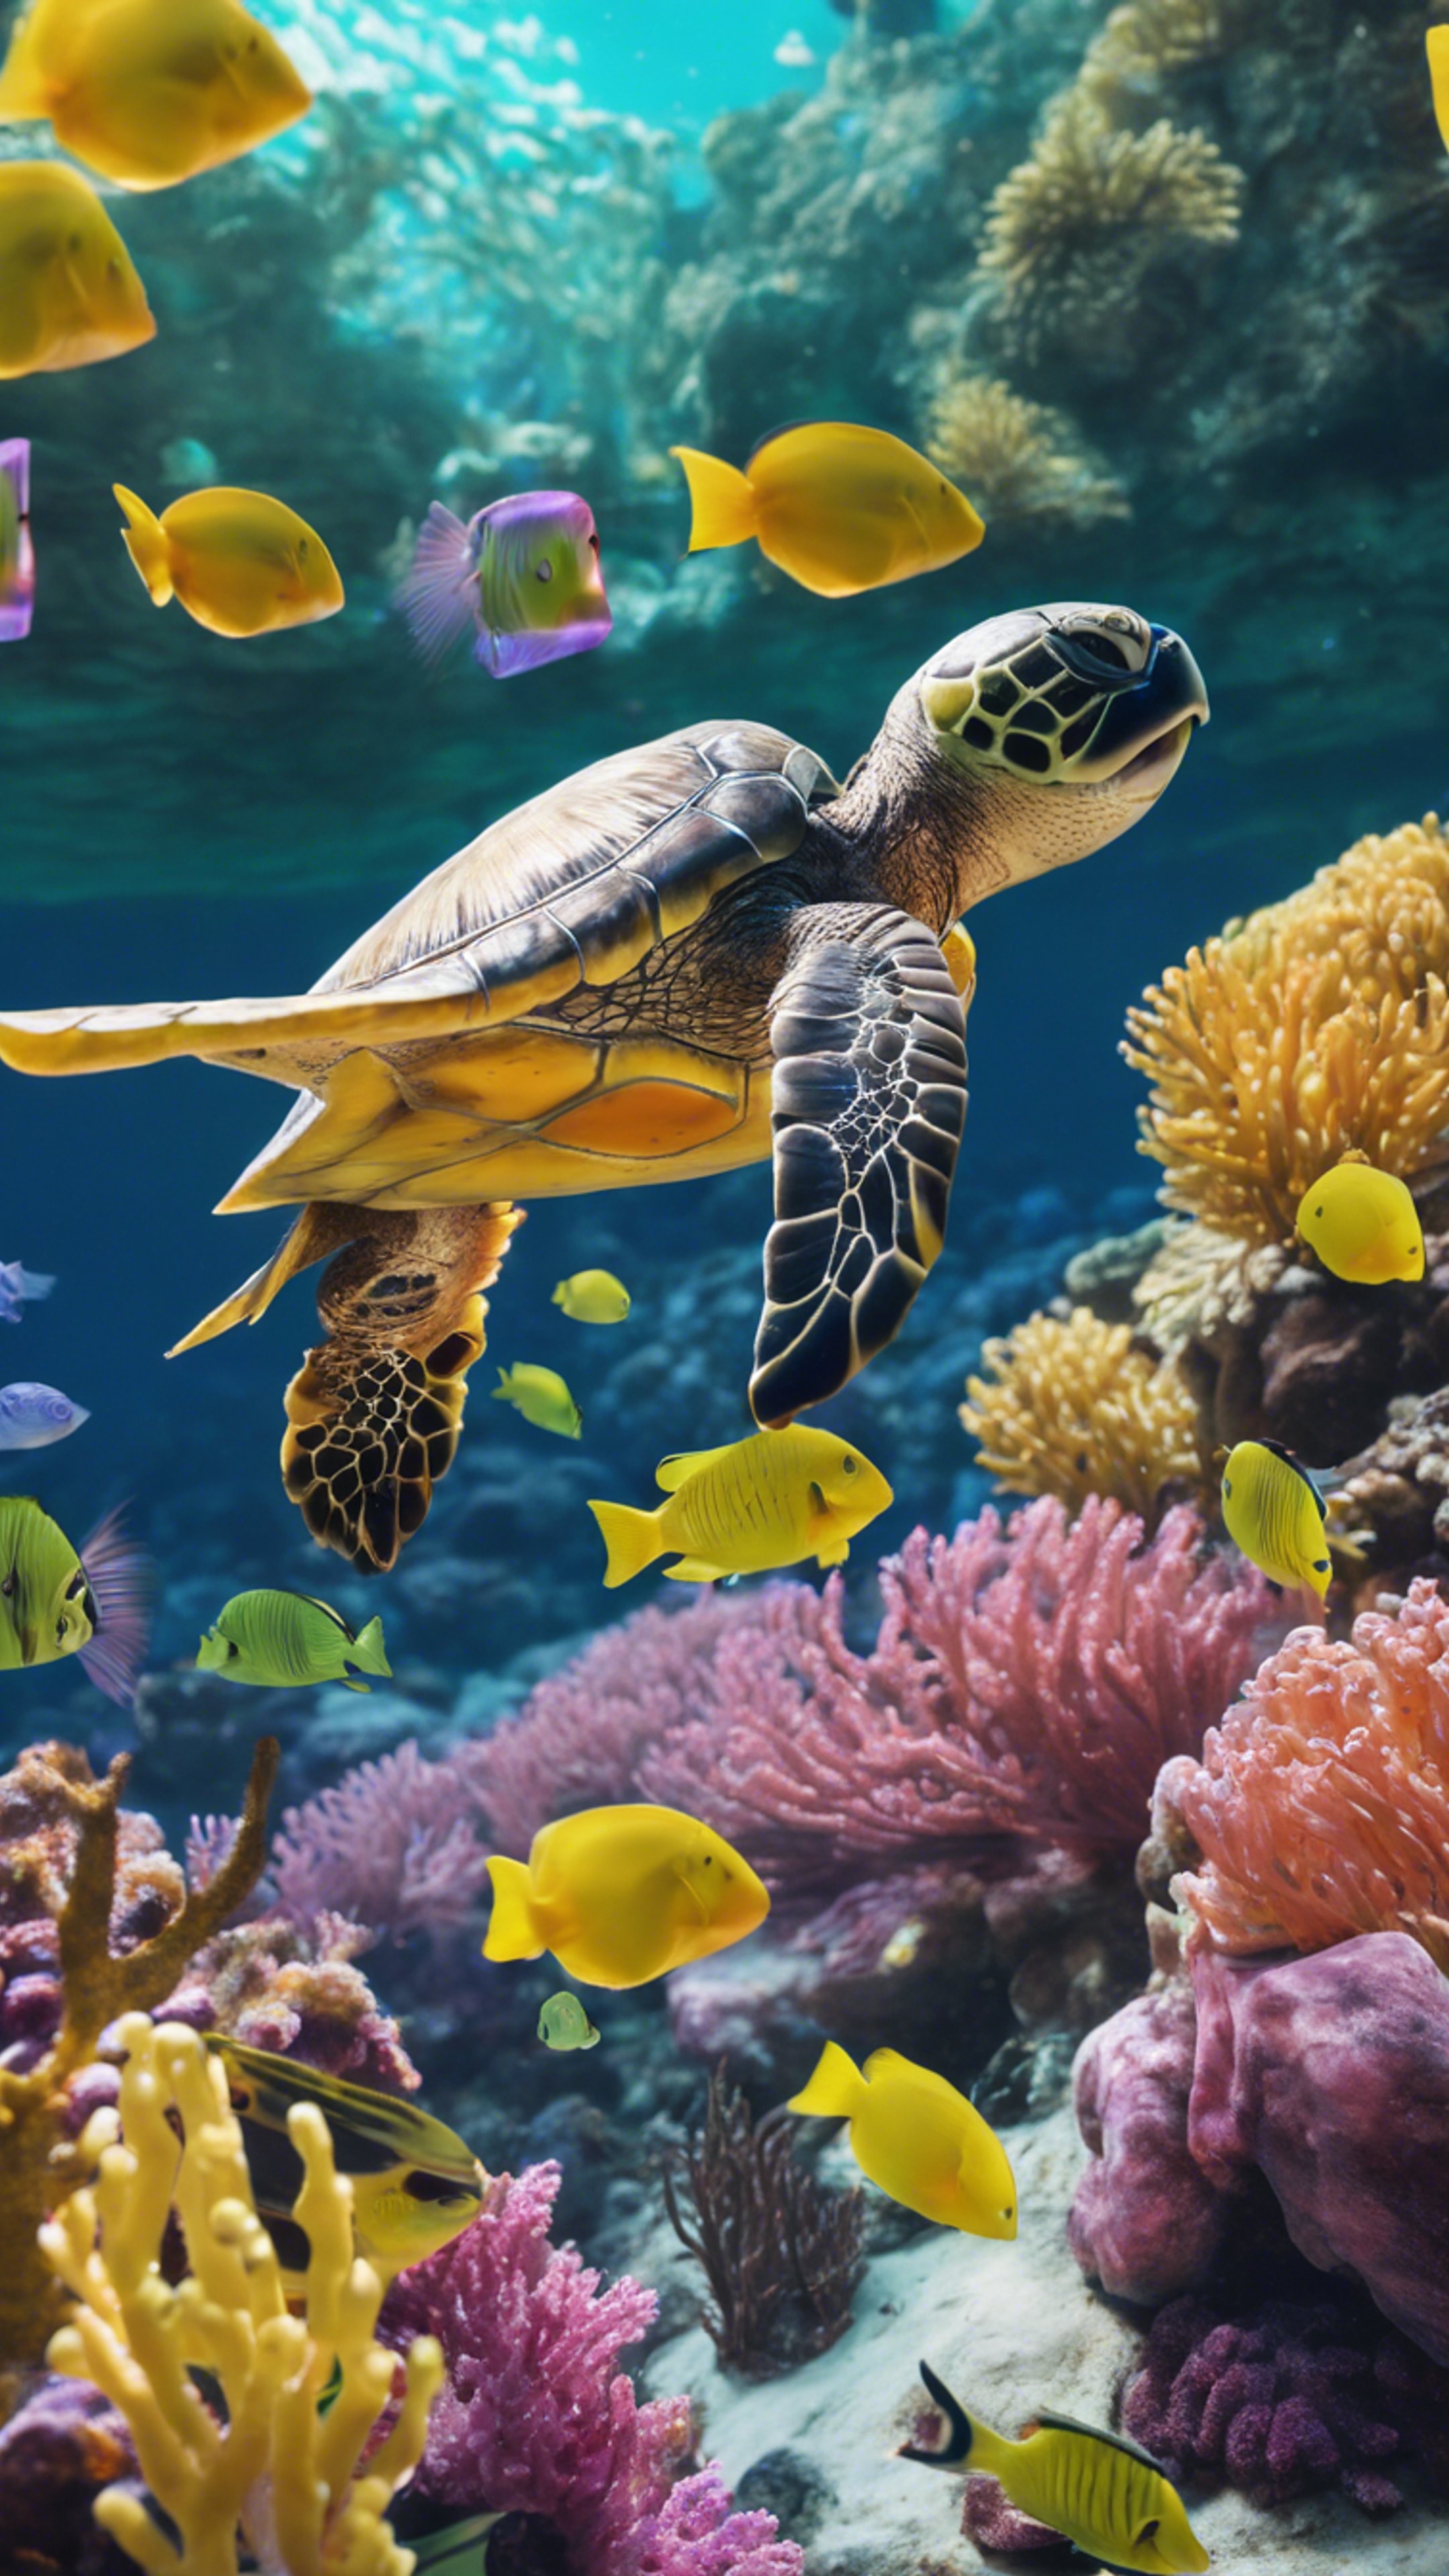 A sea turtle curiously interacting with colorful fishes in a reef. کاغذ دیواری[2bbd294c31244e90b849]